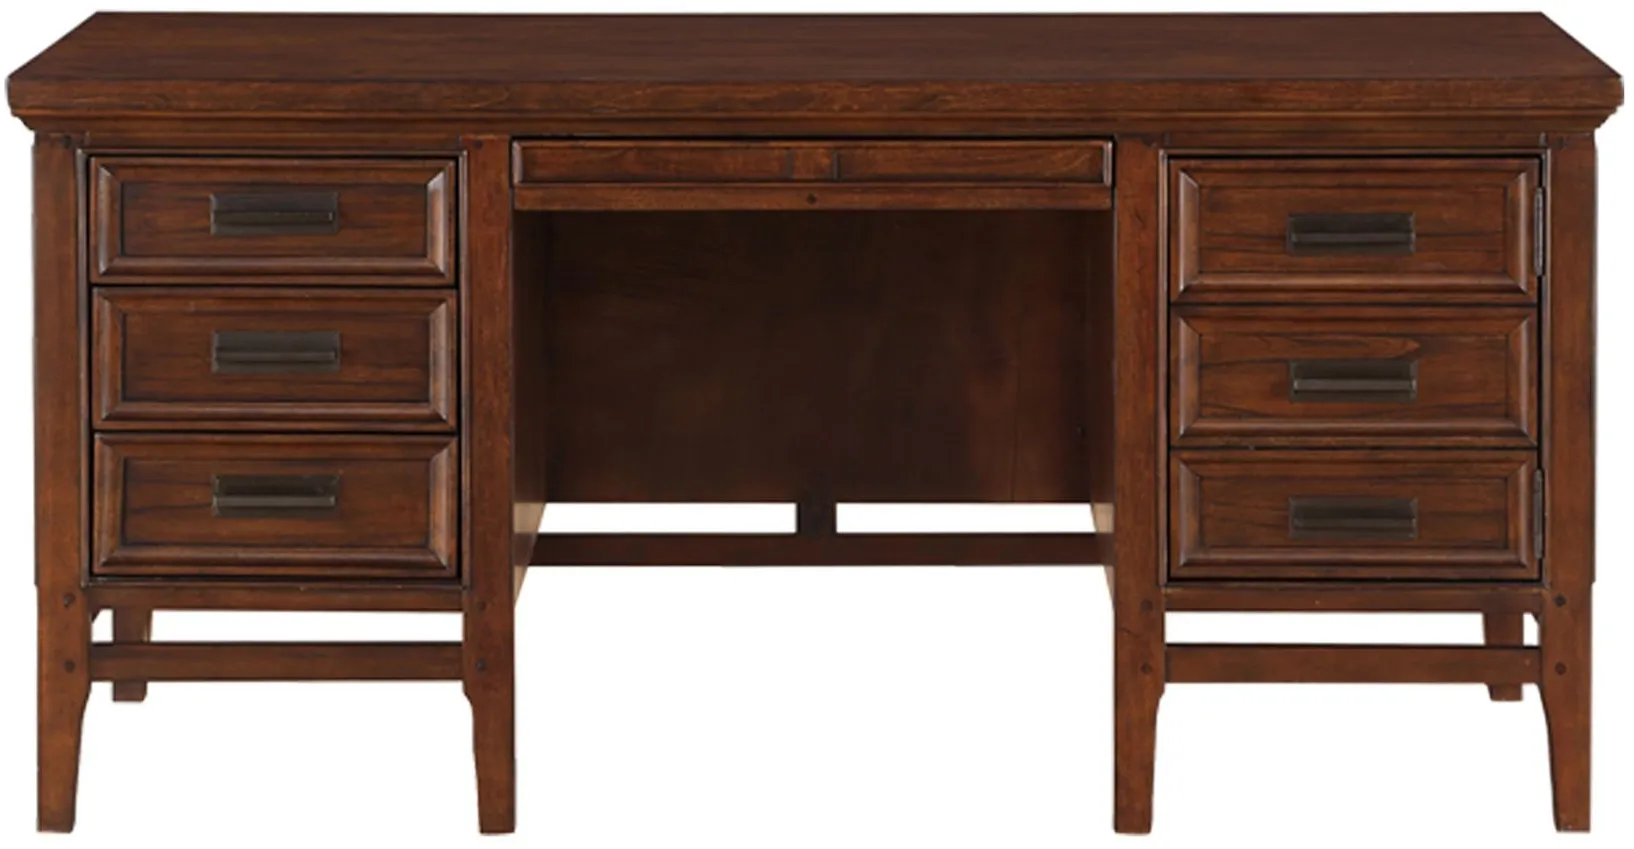 Tamsin Executive Desk in Brown cherry by Homelegance